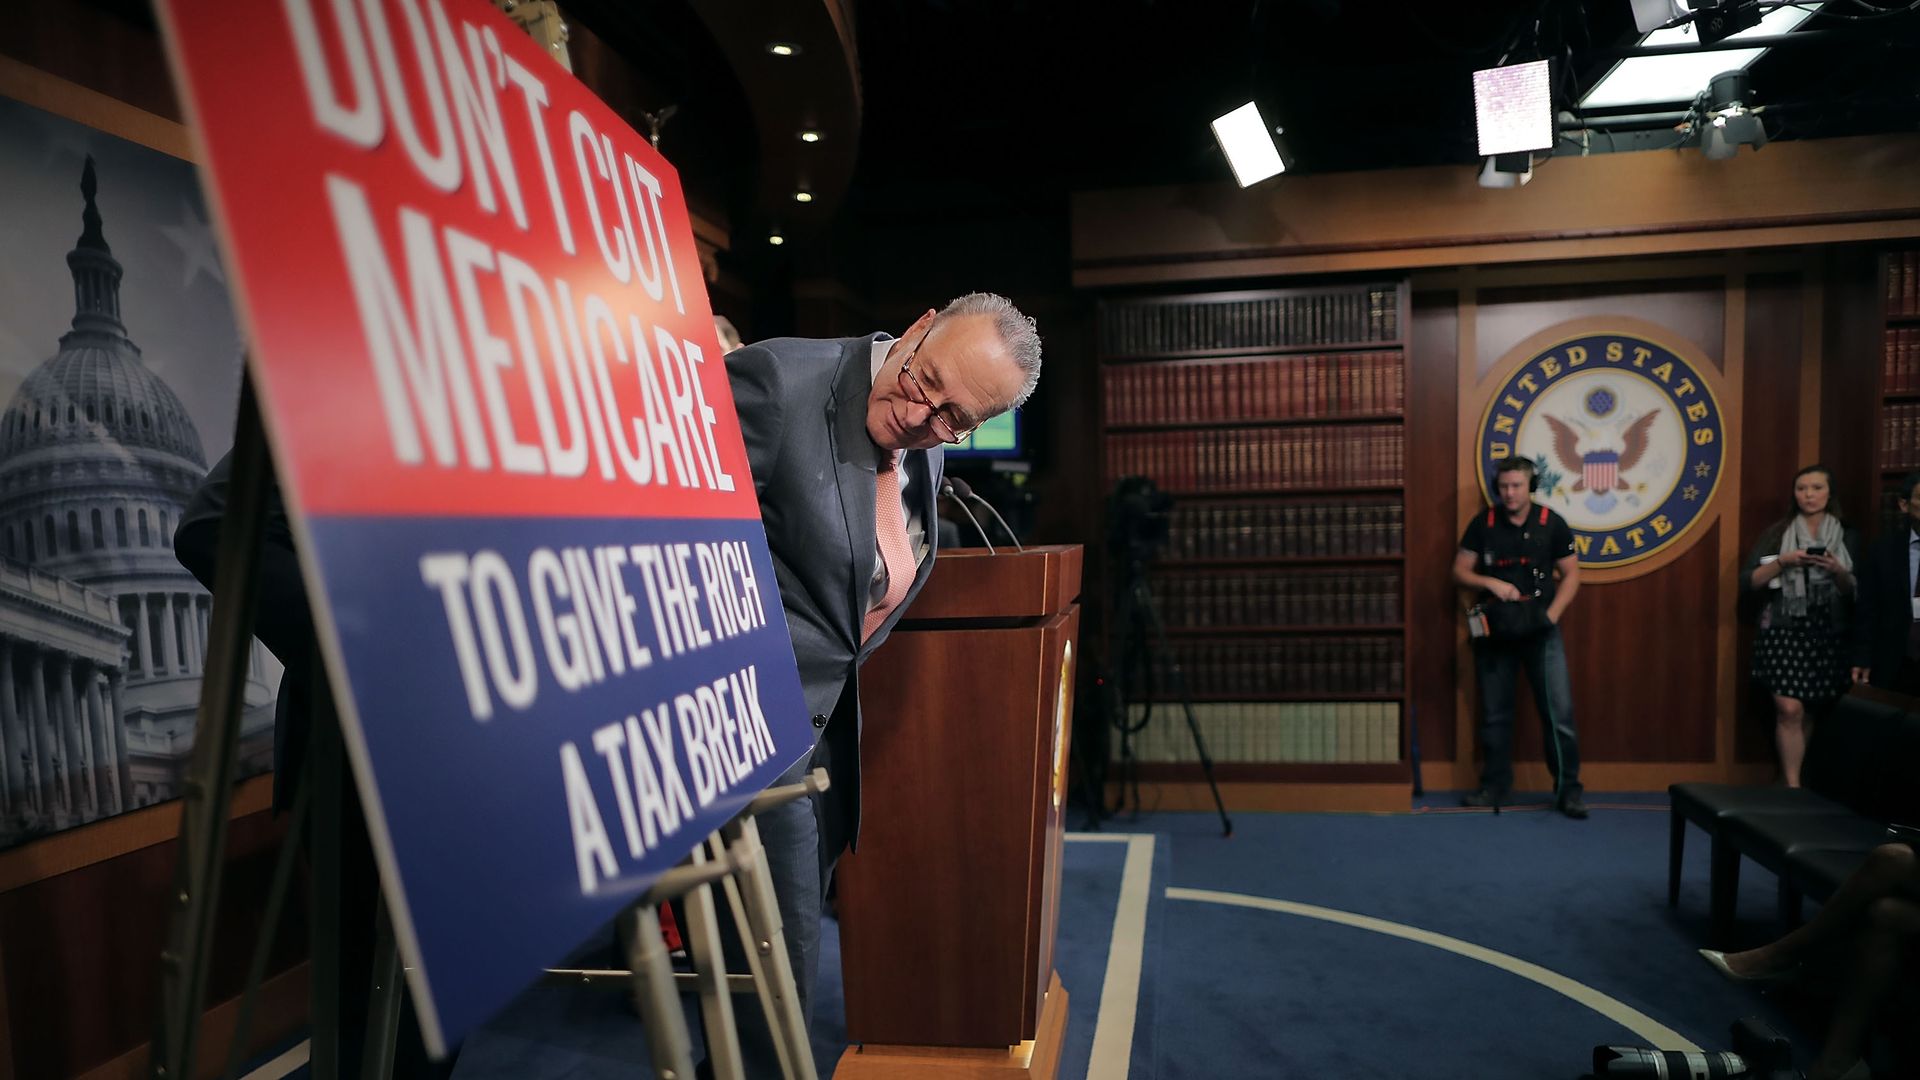 Chuck Schumer leaning over to look at a sign about health care and taxes